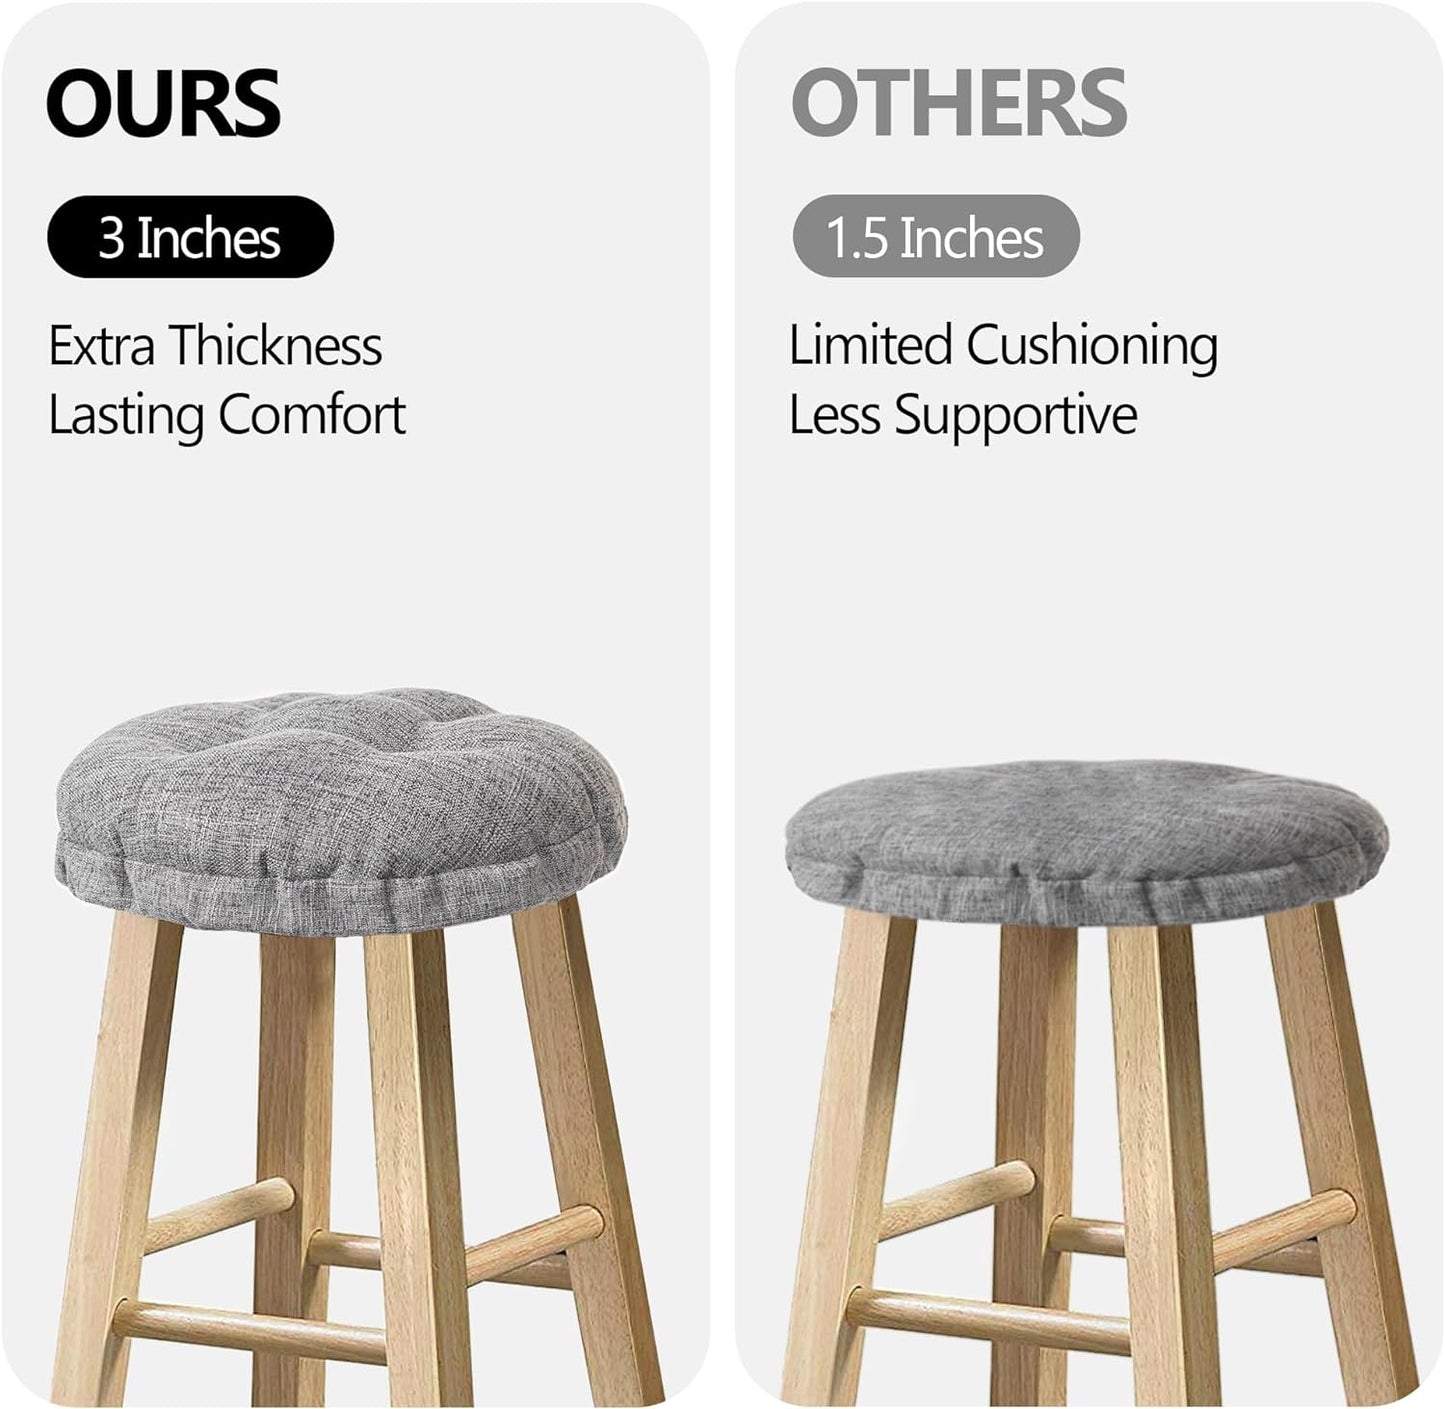 Sunlit Bar Stool Covers - Set of 2 Round Bar Stool Seat Covers, Soft and Cushioned Bar Chair Covers, Easy to Install and Wash, Cover Only, 14 Inch Diameter, Black